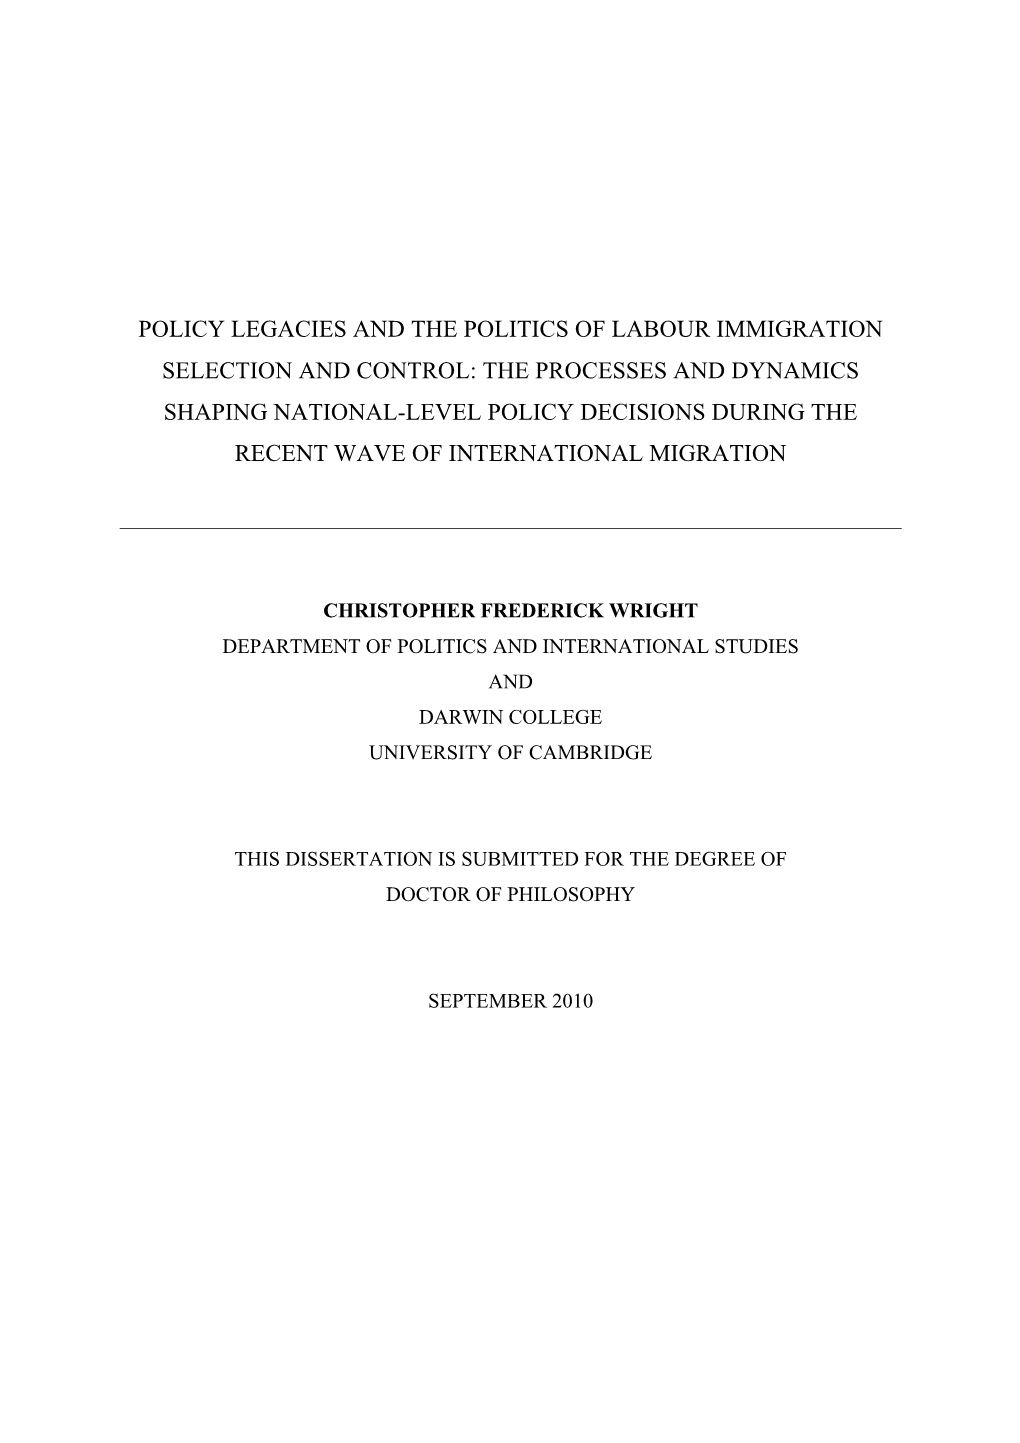 Policy Legacies and the Politics